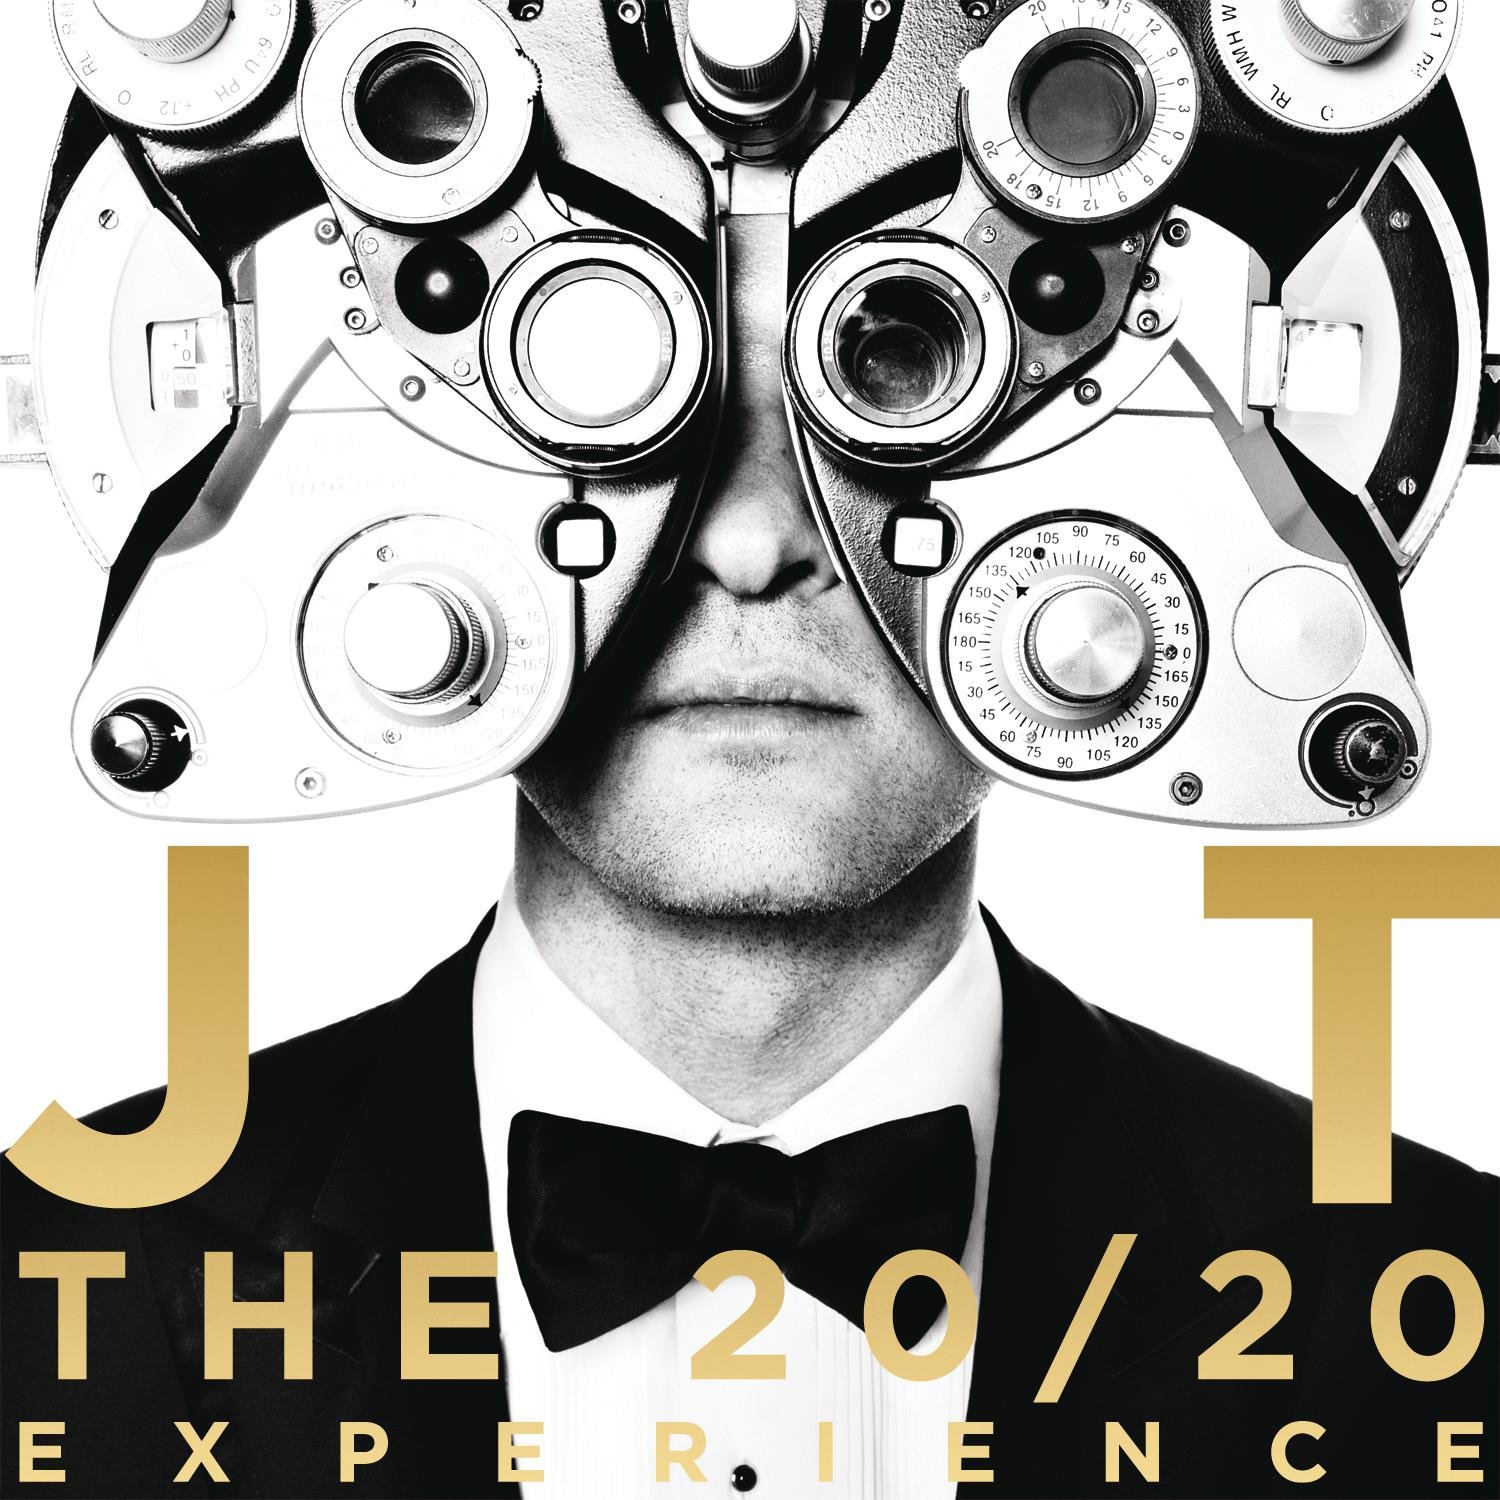 Justin Timberlake - The 20/20 Experience - Pop Rock - CD - image 2 of 2